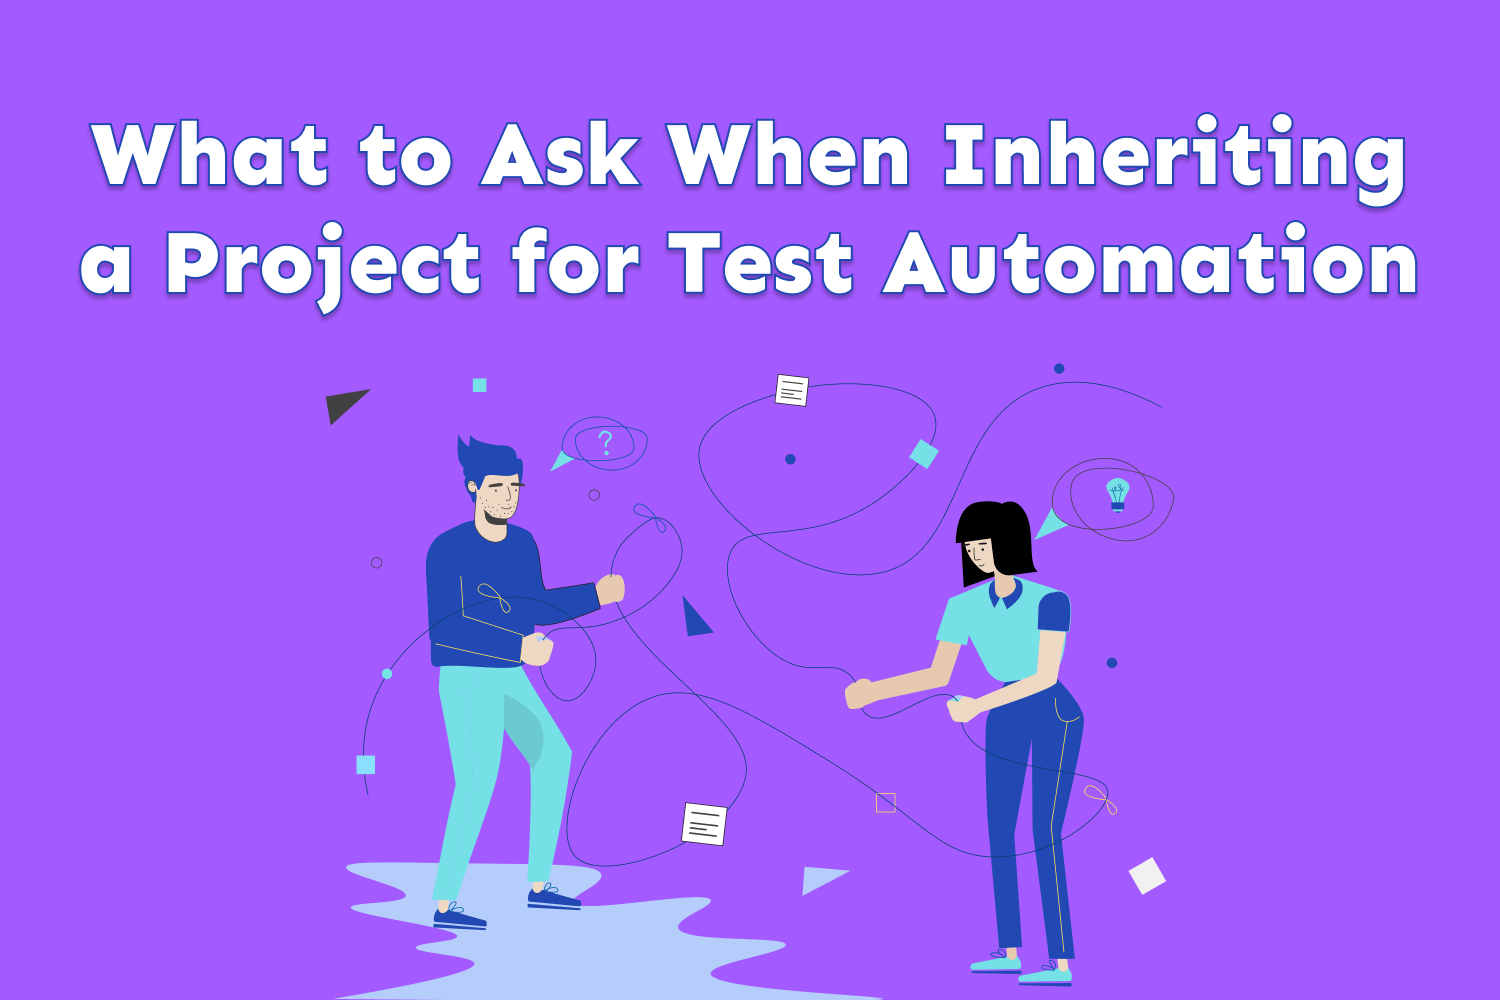 What to Ask When Inheriting a Project for Test Automation